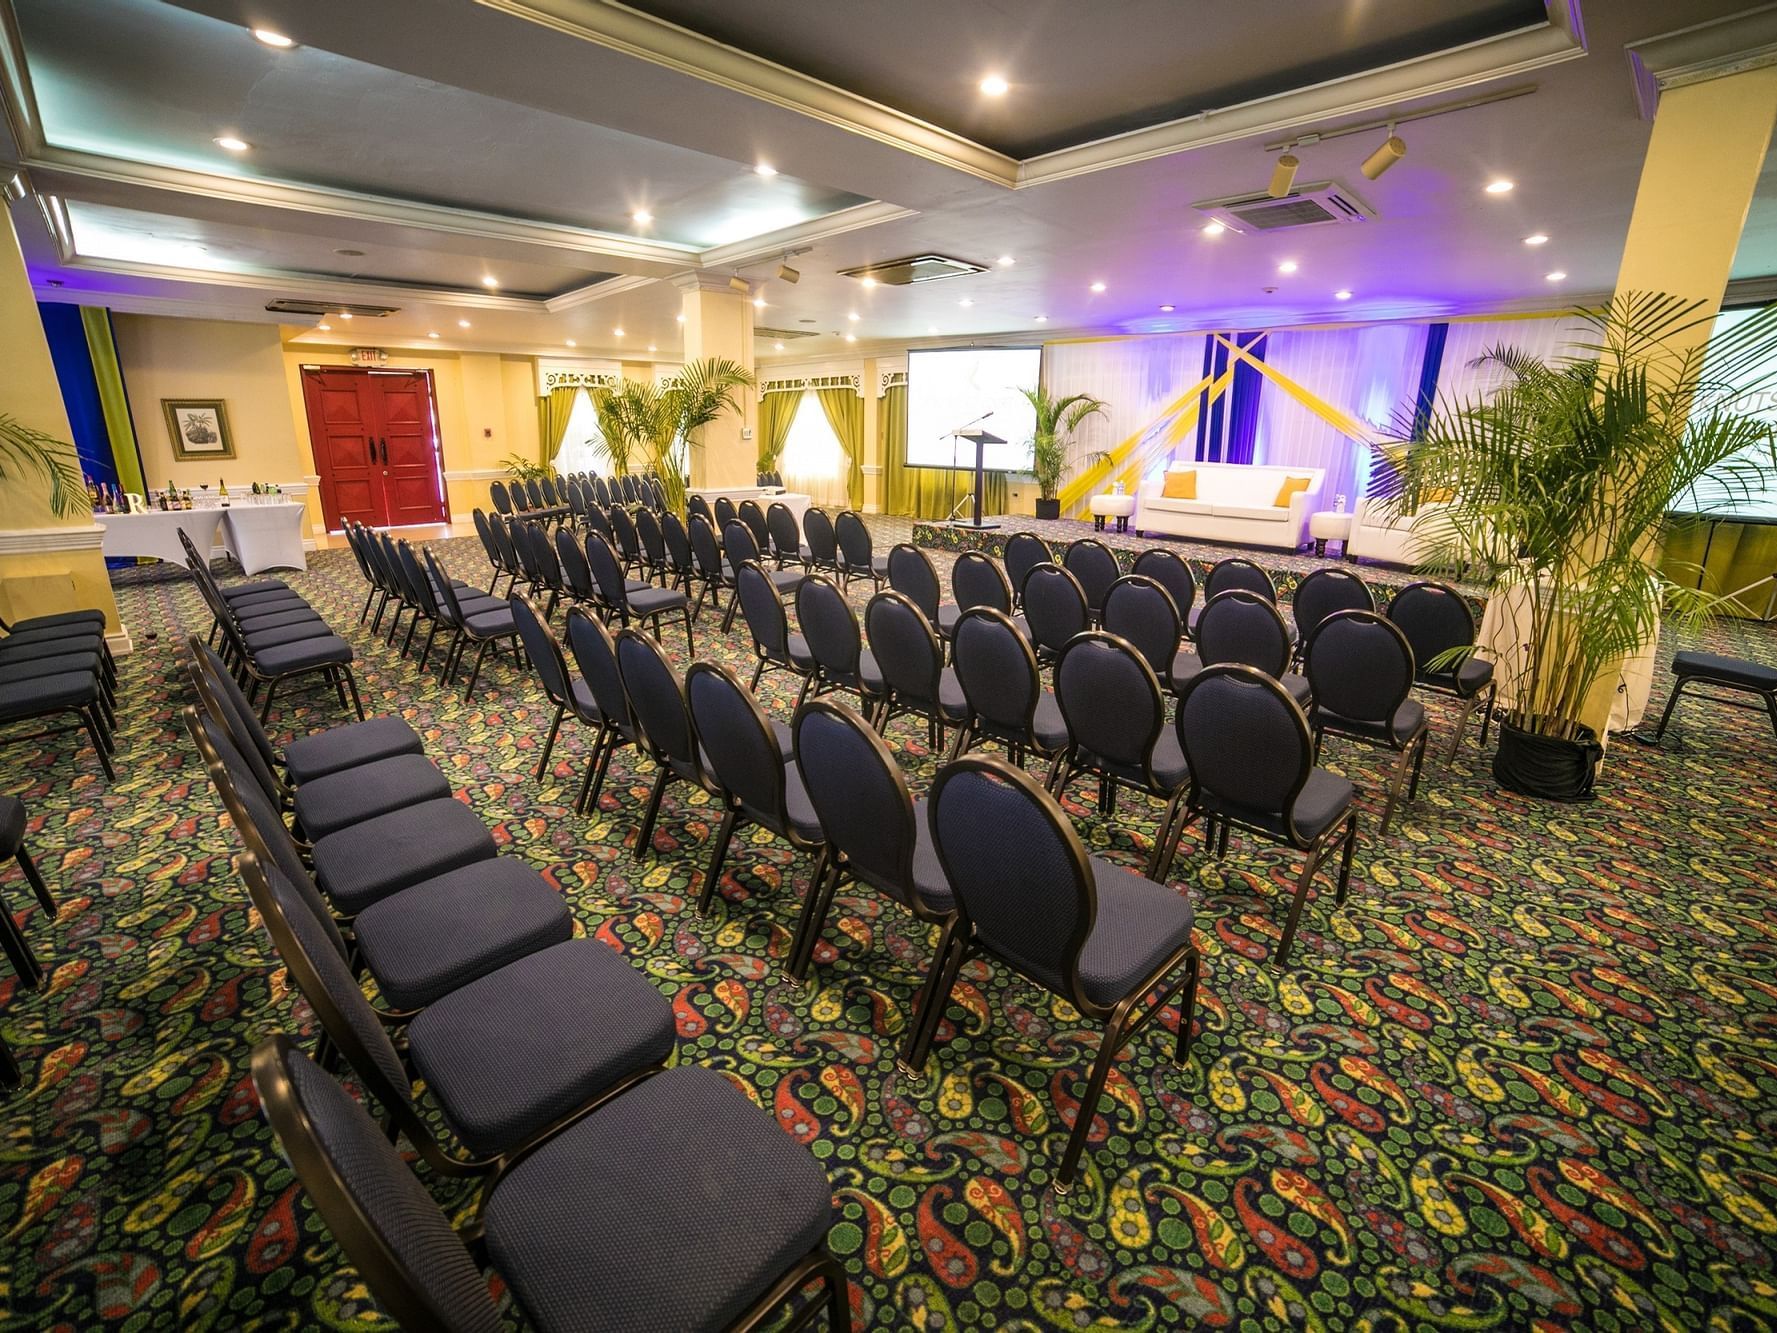 New Kingston Jamaica Venues - Knutsford Court Hotel